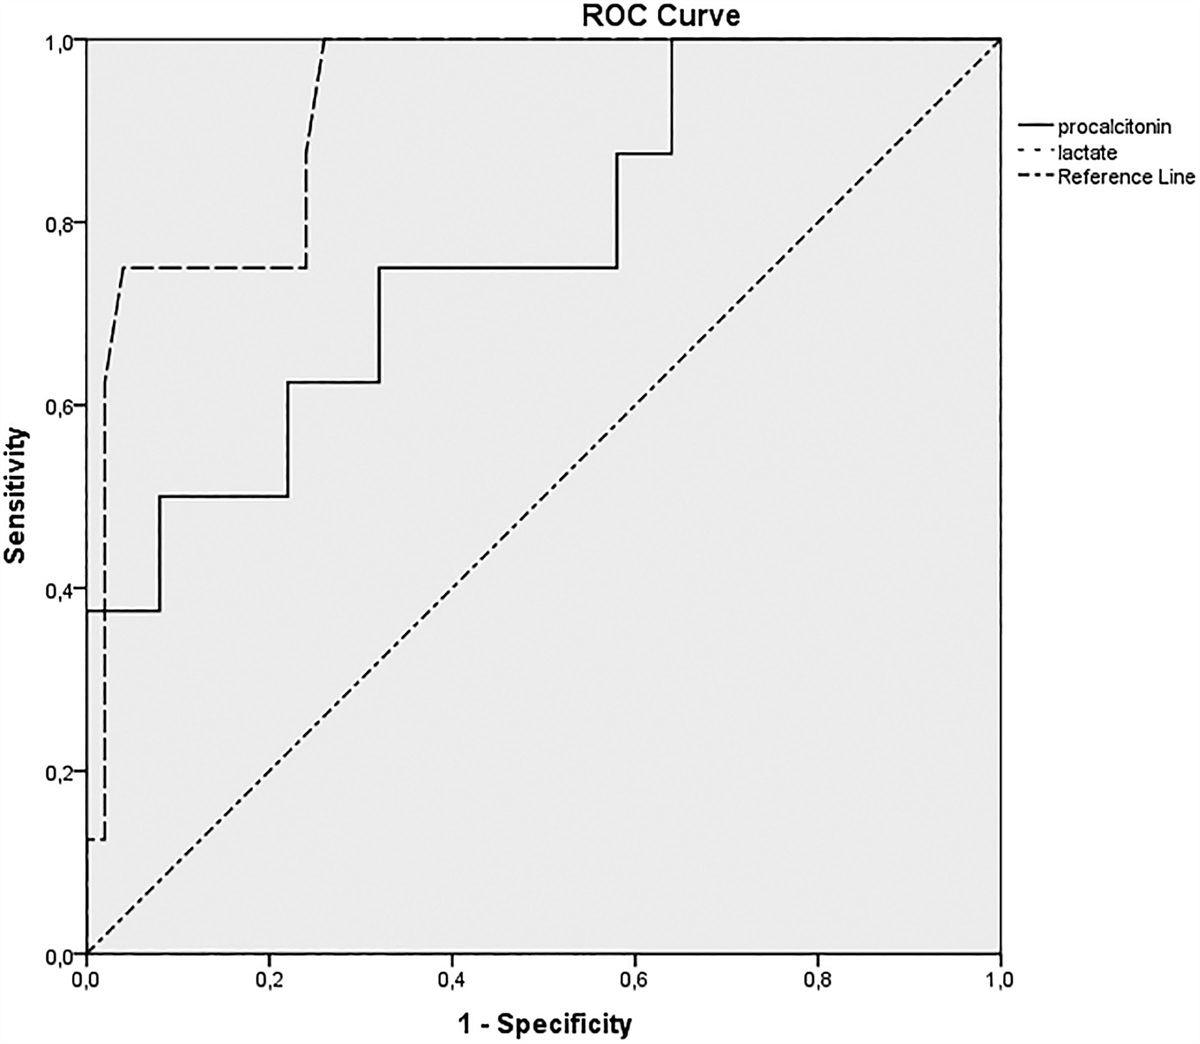 Procalcitonin and blood lactate level as predictive biomarkers in pediatric multiple trauma patients’ pediatric intensive care outcomes: A retrospective observational study